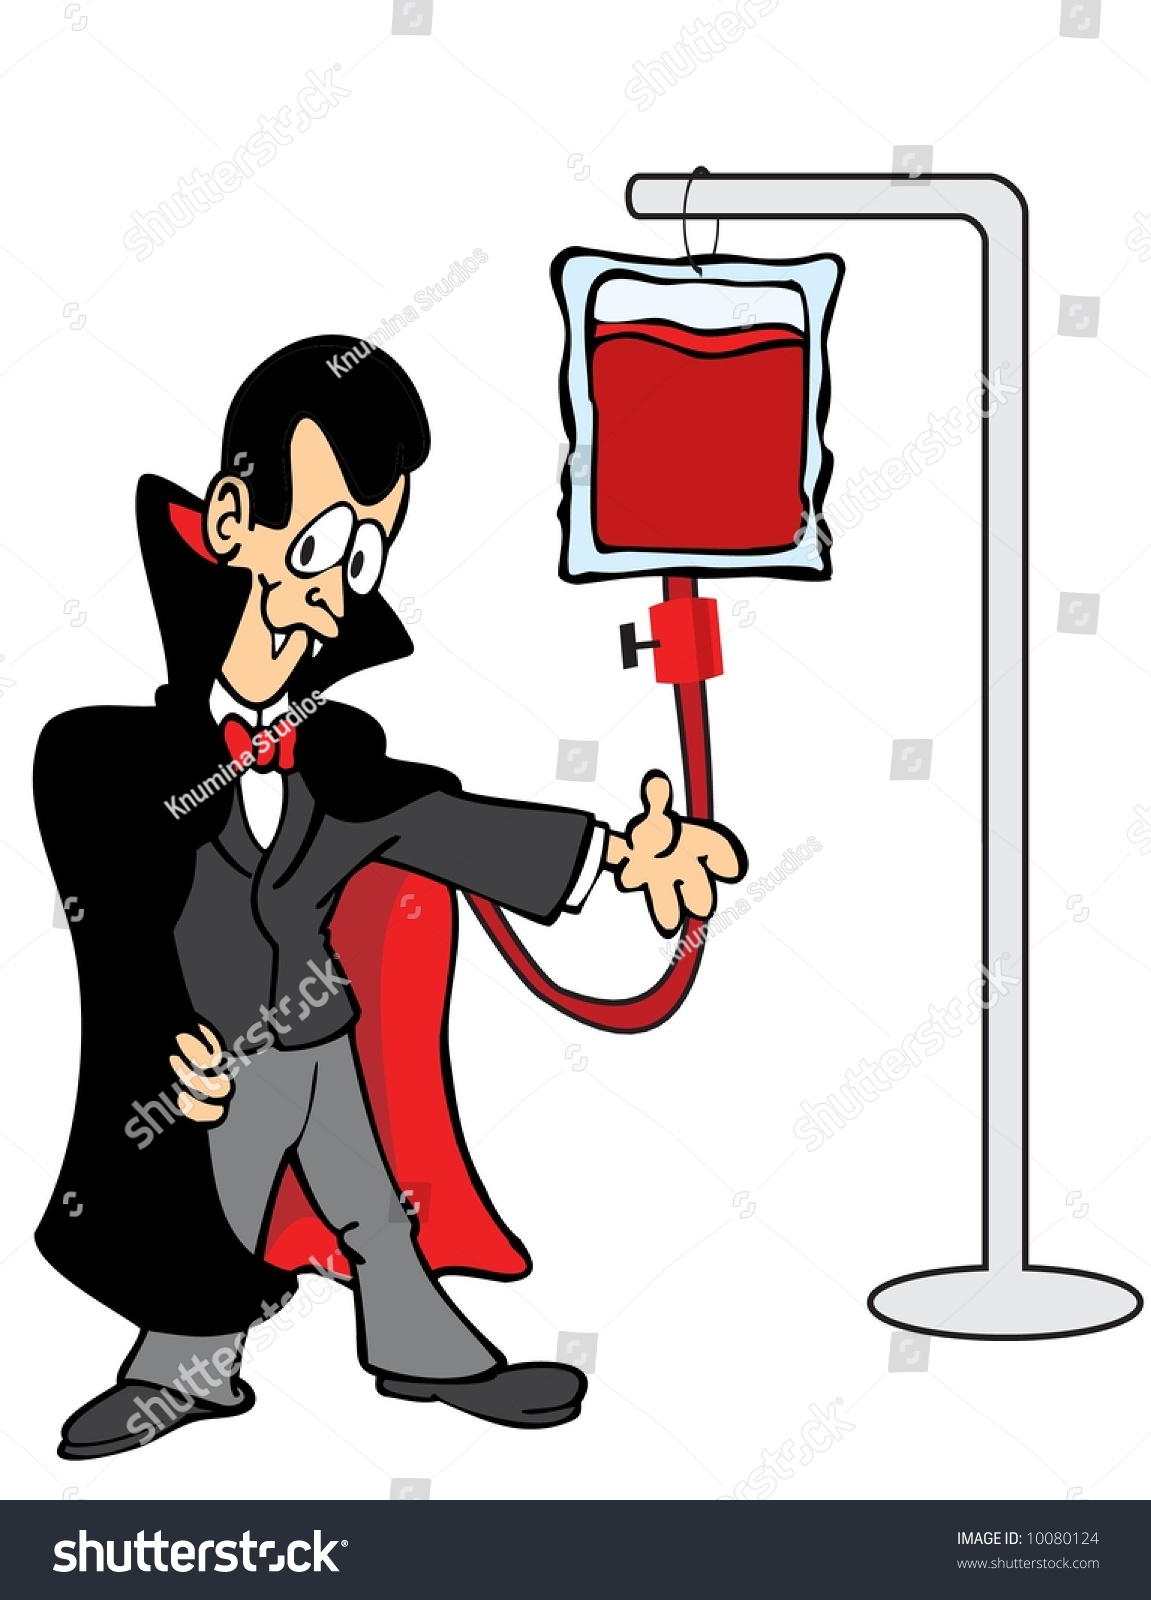 free clipart donating blood - photo #17